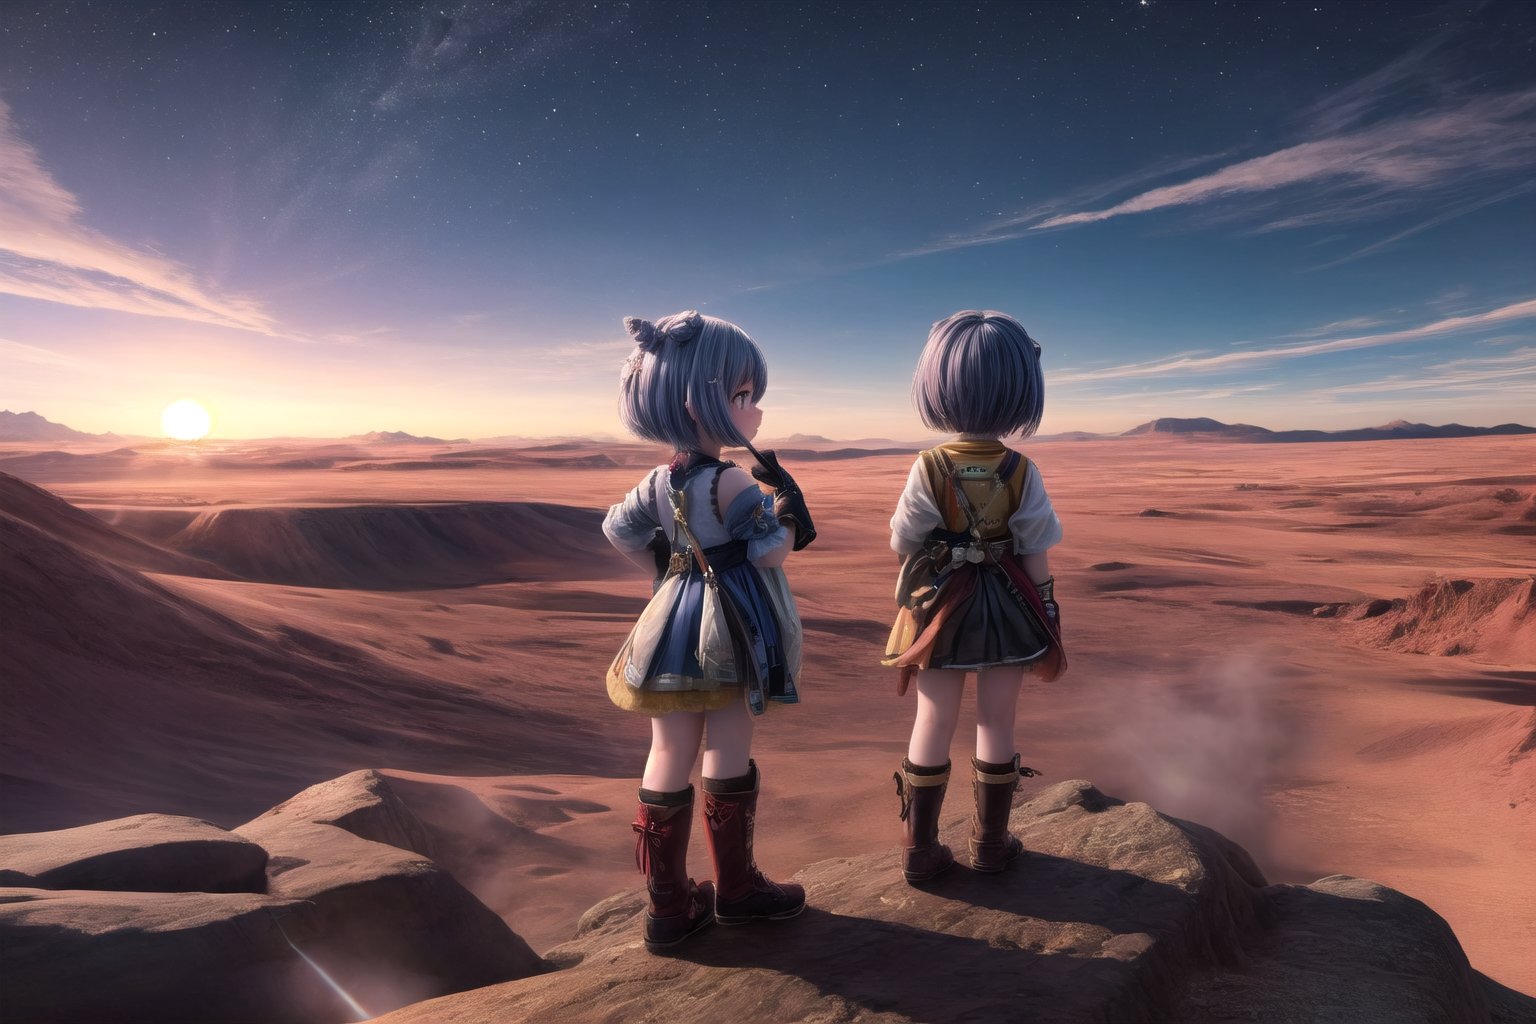 Little Keqingdef and little Xianglingdef stand back-to-back on the crimson Martian terrain, their silhouettes bold against a breathtaking HDR sunset. The rusty red landscape stretches out in 32k UHD clarity, with rocks and dust devils rendered in hyper-realistic detail. Against the vibrant sky, their figures are set ablaze by the warm glow of the setting sun. R2D2 rolls beside them, as the Mars Rover and alien sit majestically on the barren landscape, surrounded by an otherworldly beauty.